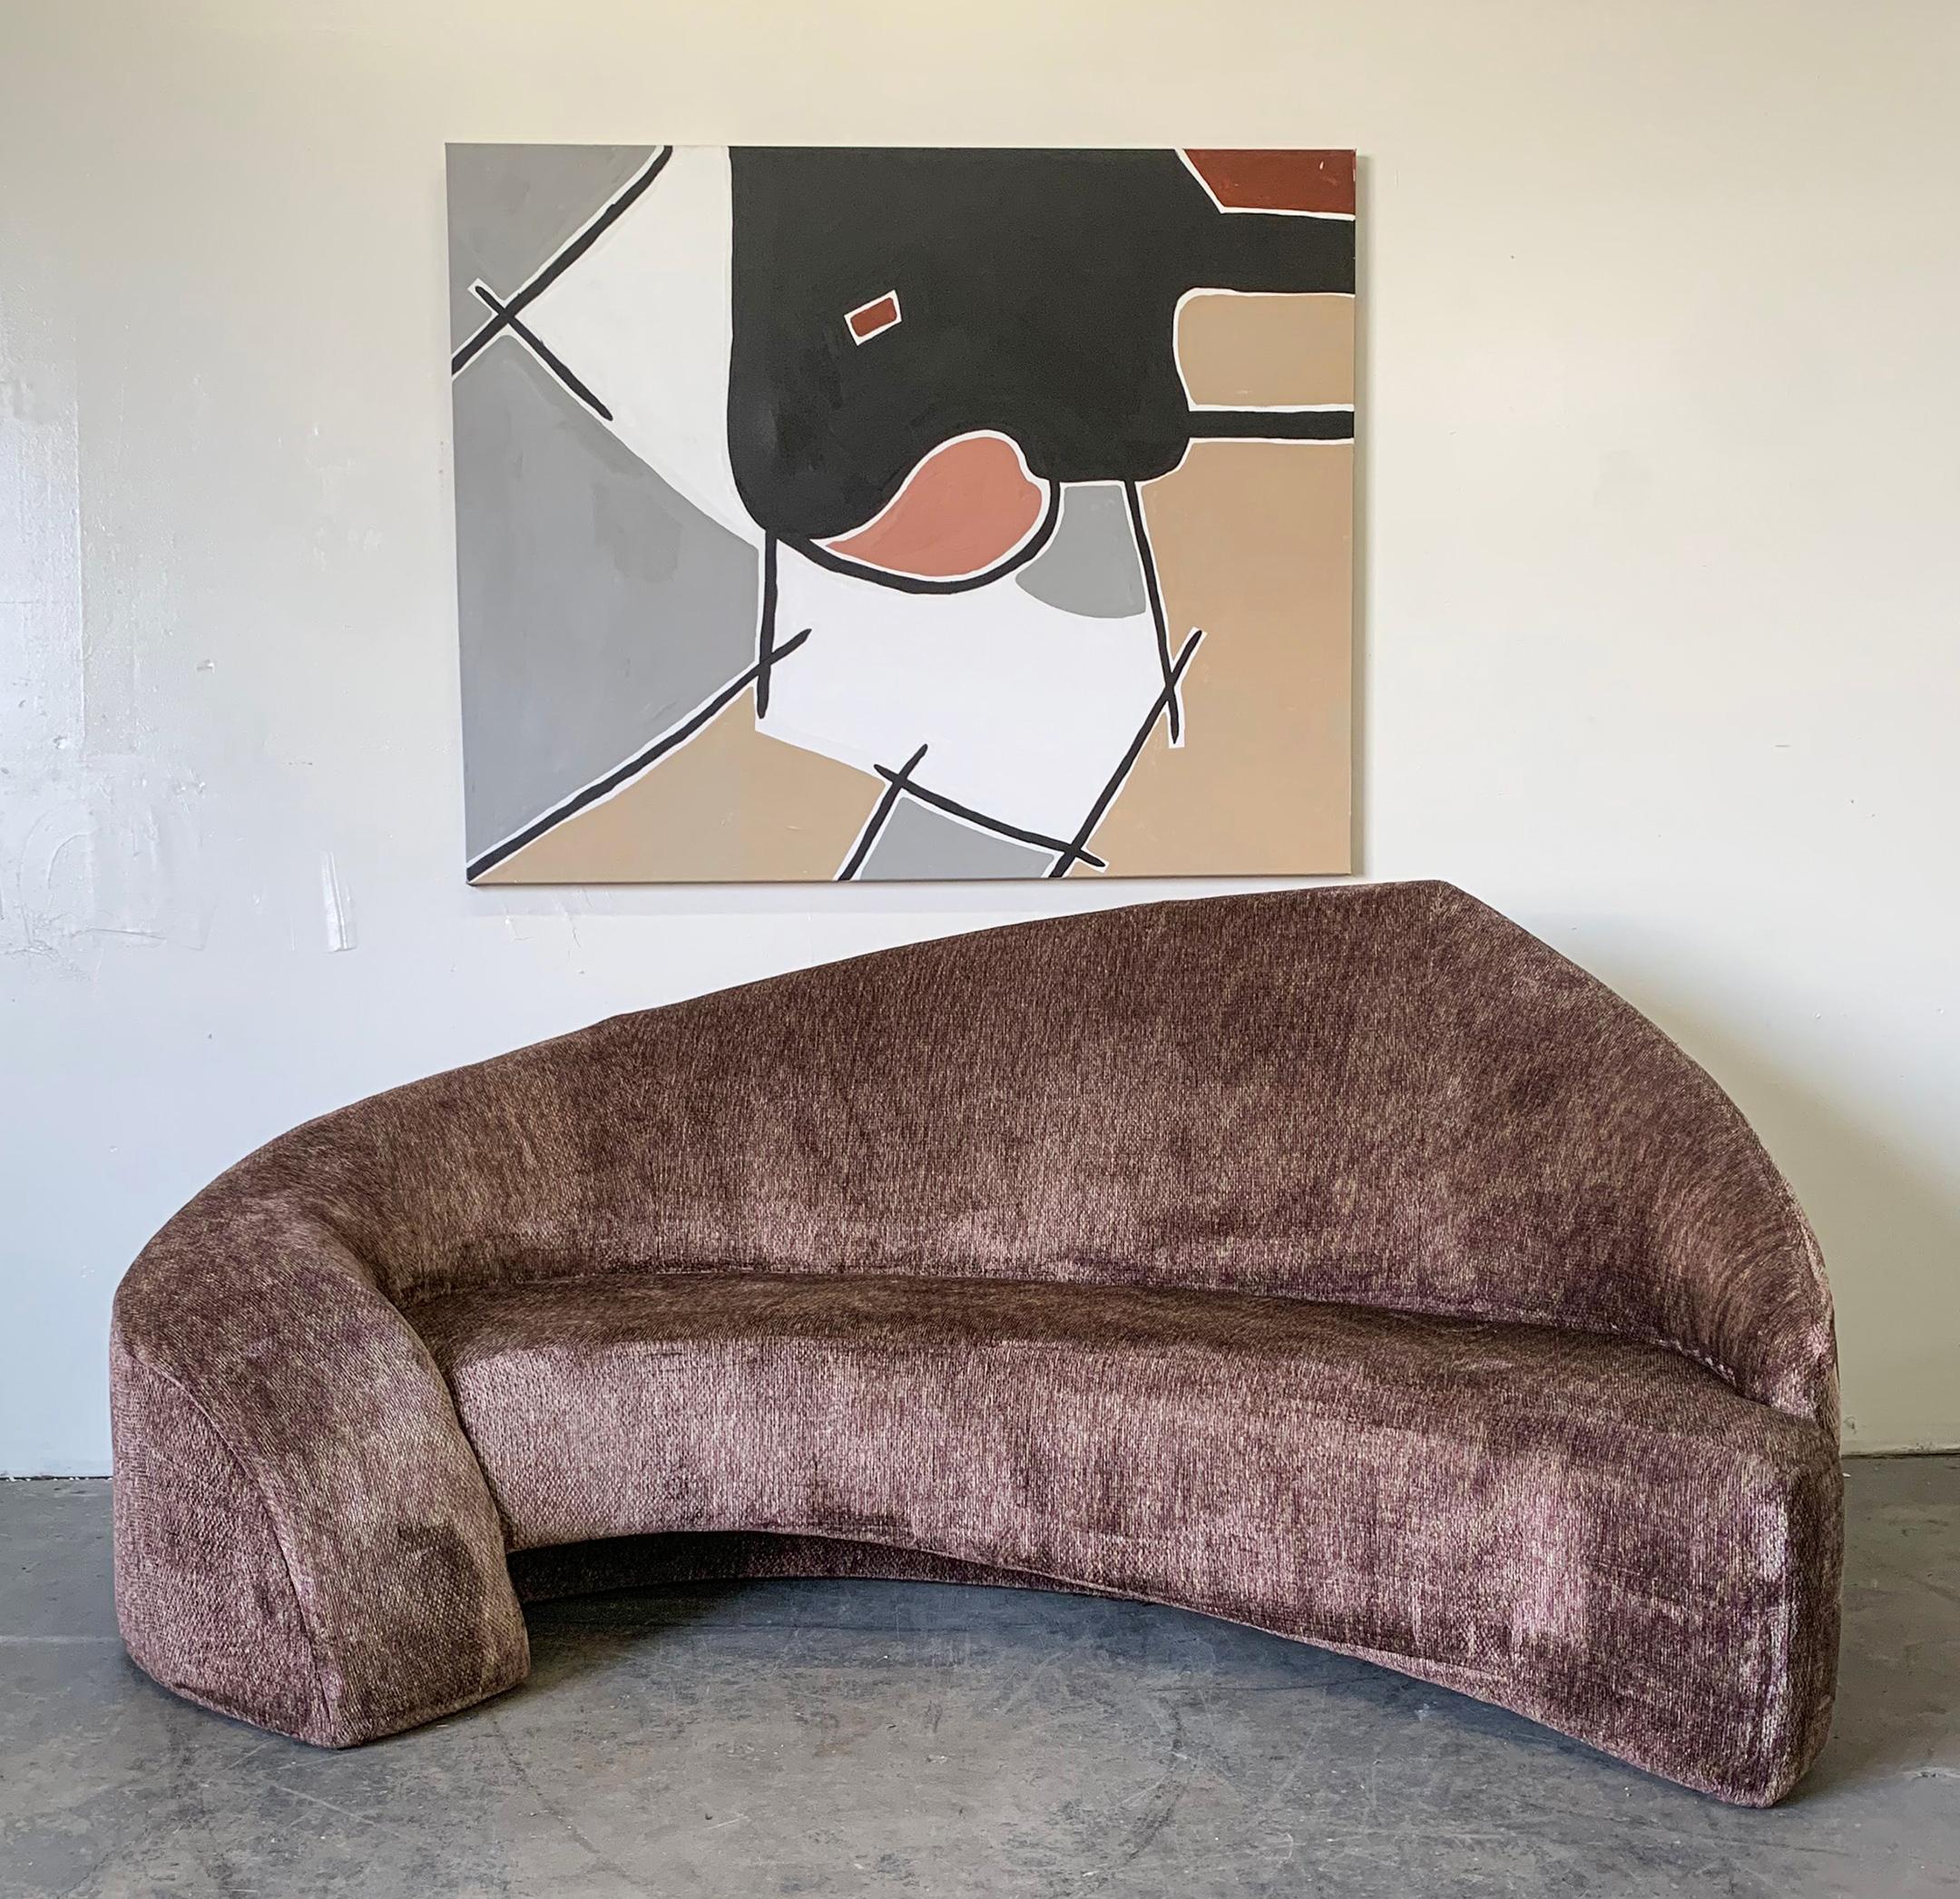 An absolutely stunning Postmodern sofa designed and created in the mid-1990s. This stunning sofa is evocative of Vladimir Kagan custom designs and would lend itself nicely to Mid-Century Modern and postmodern styling. This contemporary cloud style